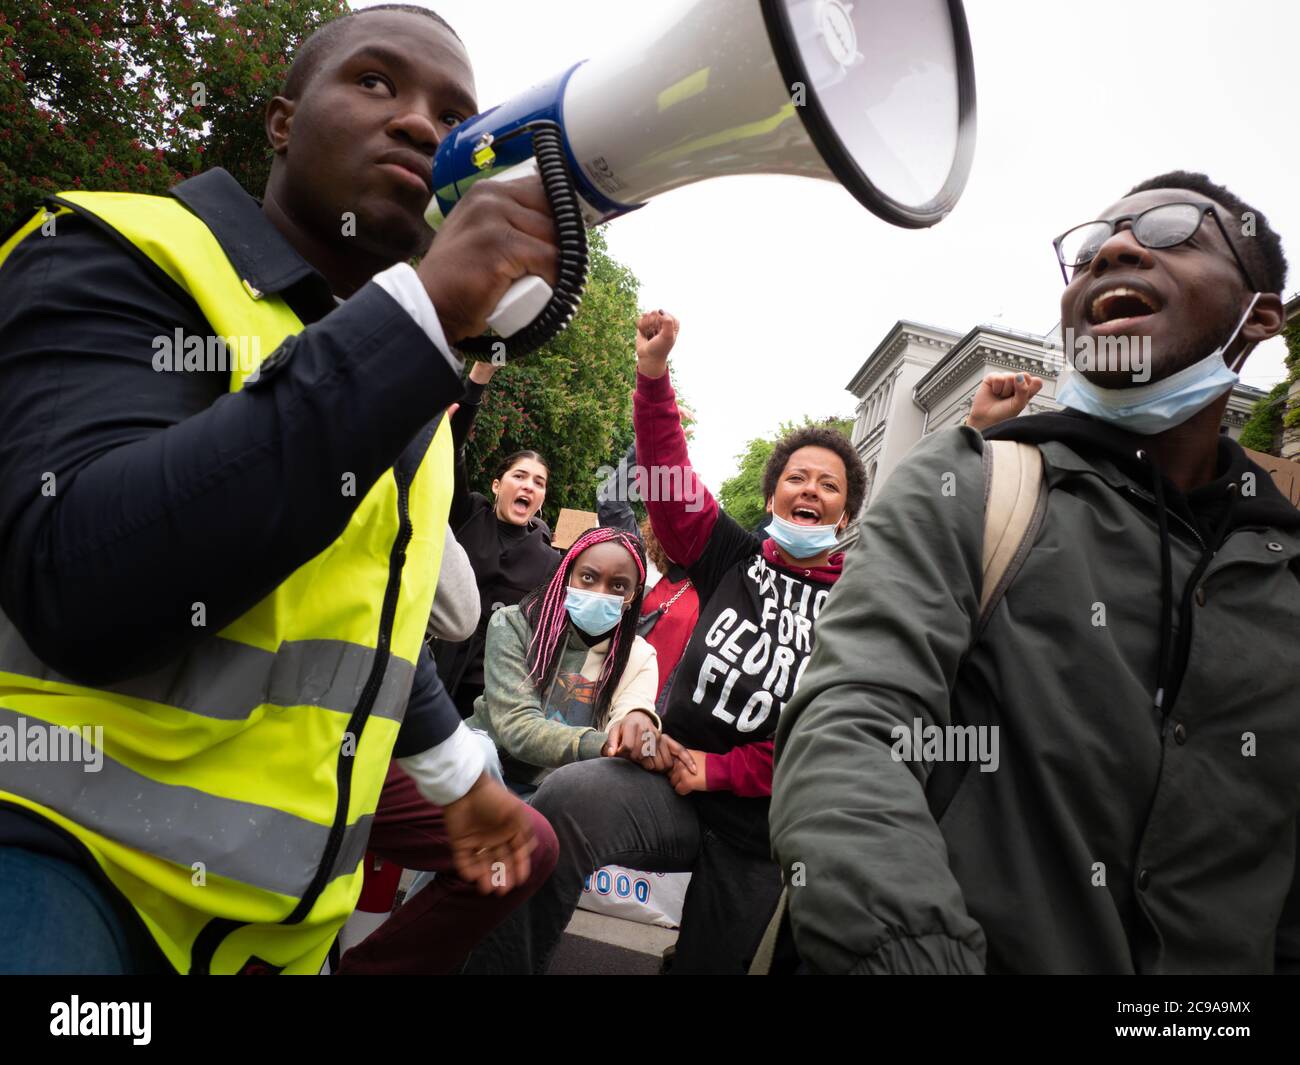 OSLO - JUNE 5, 2020: Thousands march from the U.S. embassy to Norwegian parliament to express solidarity with the Black Lives Matter movement, Oslo, Norway, June 5, 2020. Stock Photo